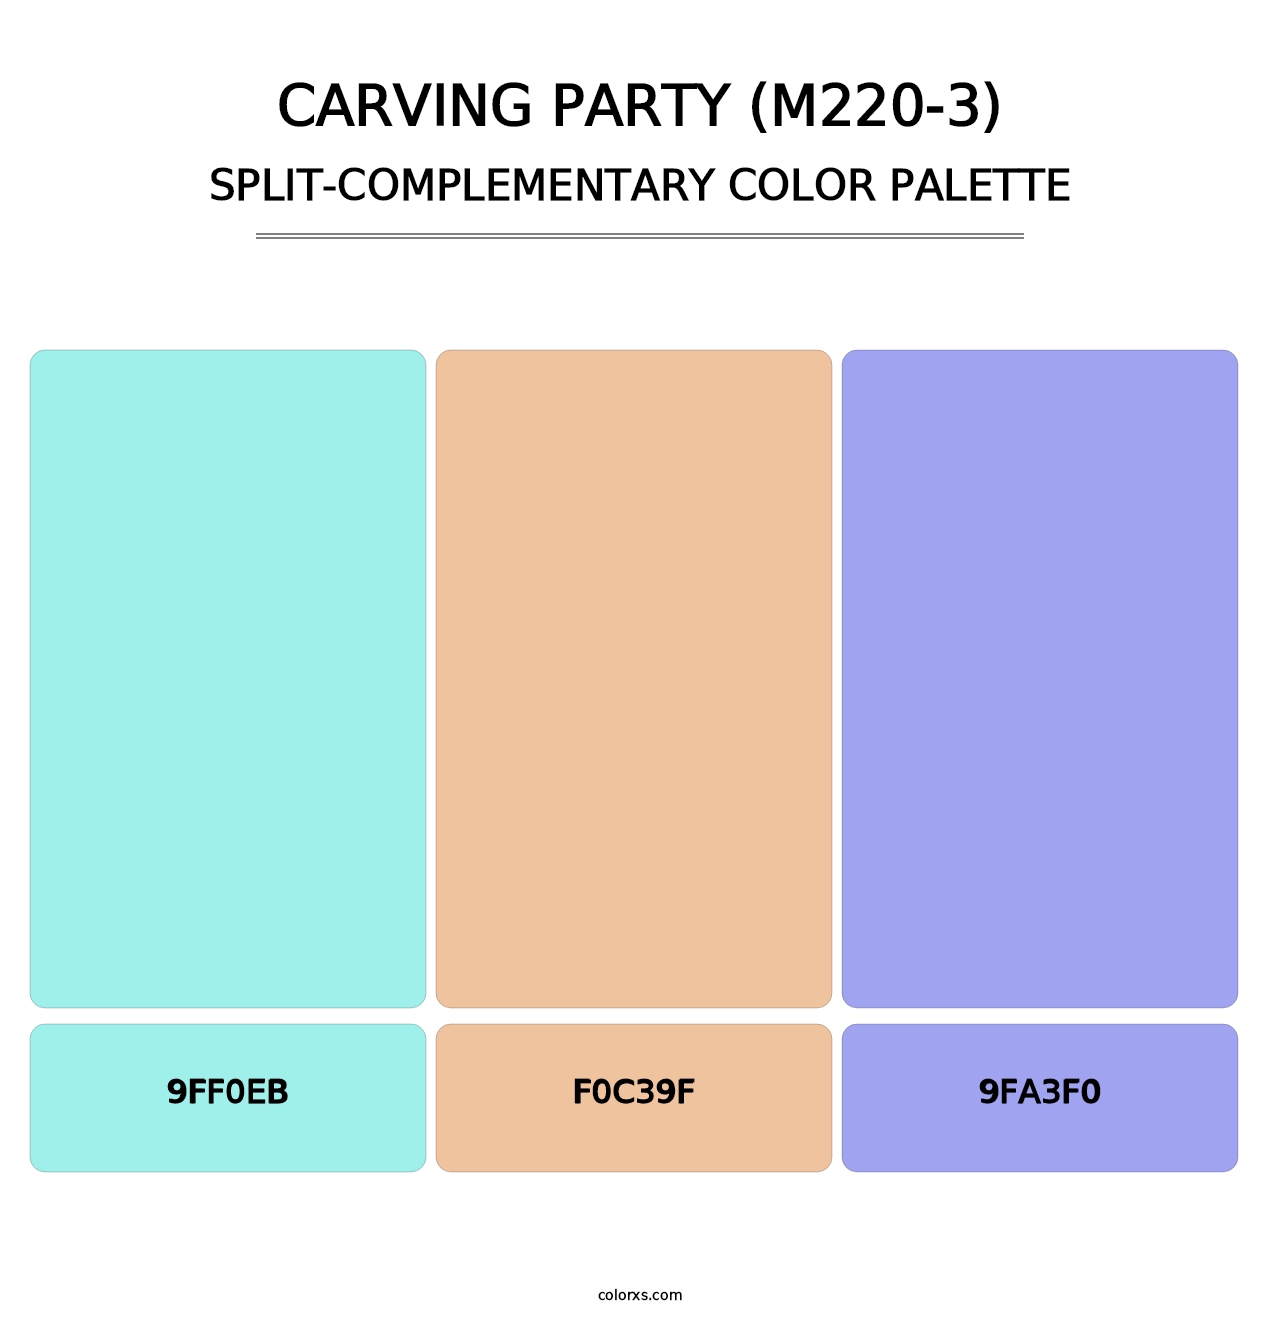 Carving Party (M220-3) - Split-Complementary Color Palette